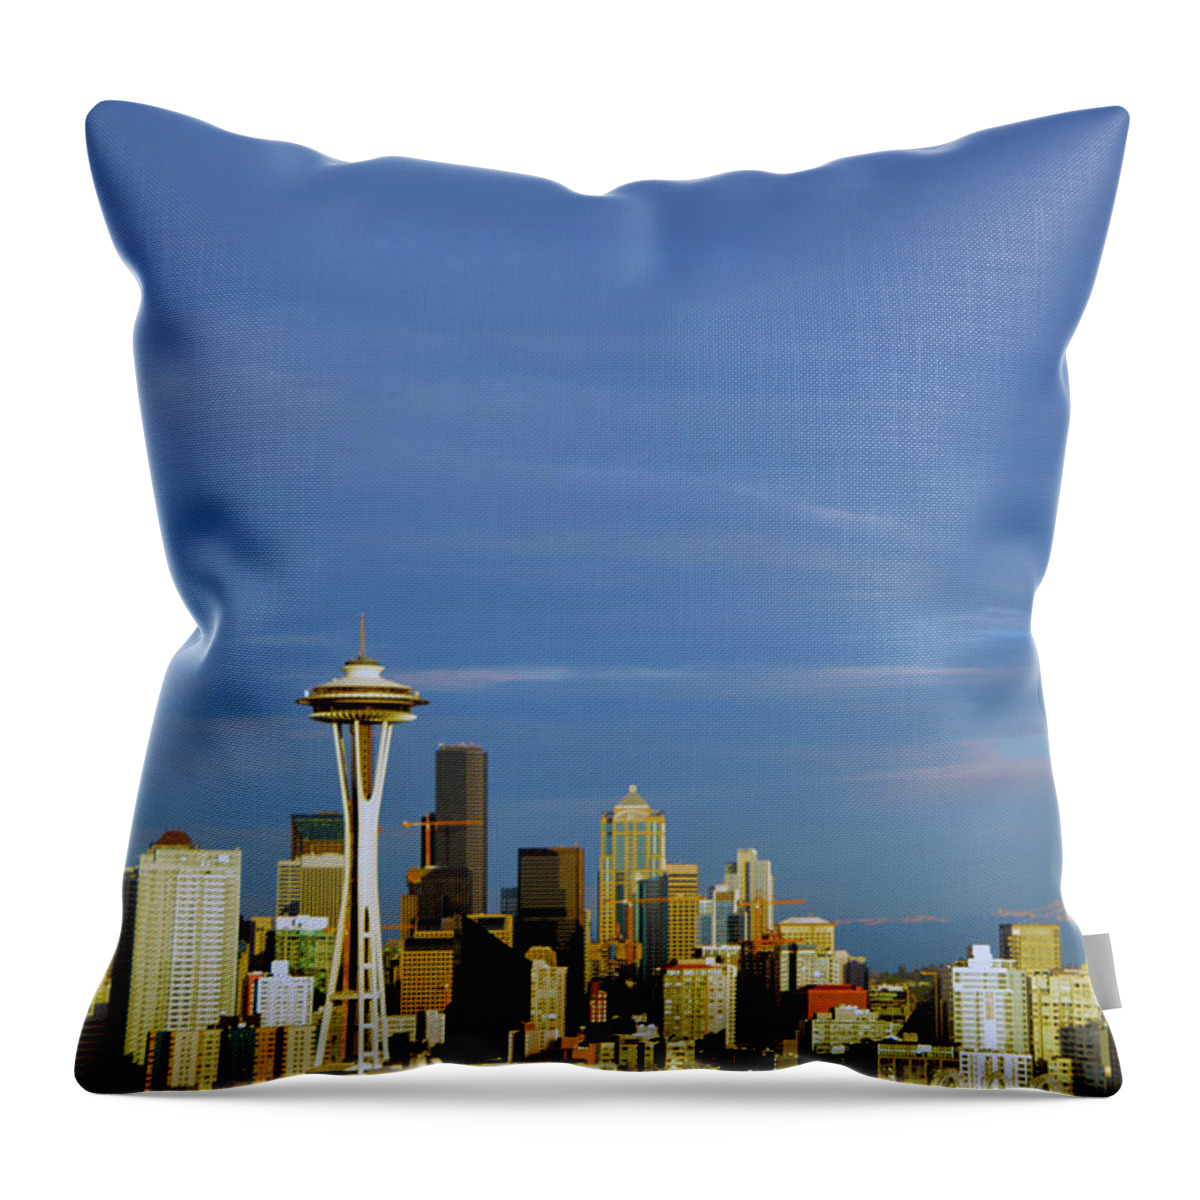  Throw Pillow featuring the photograph Frpm Kerry Park Too by Brian O'Kelly